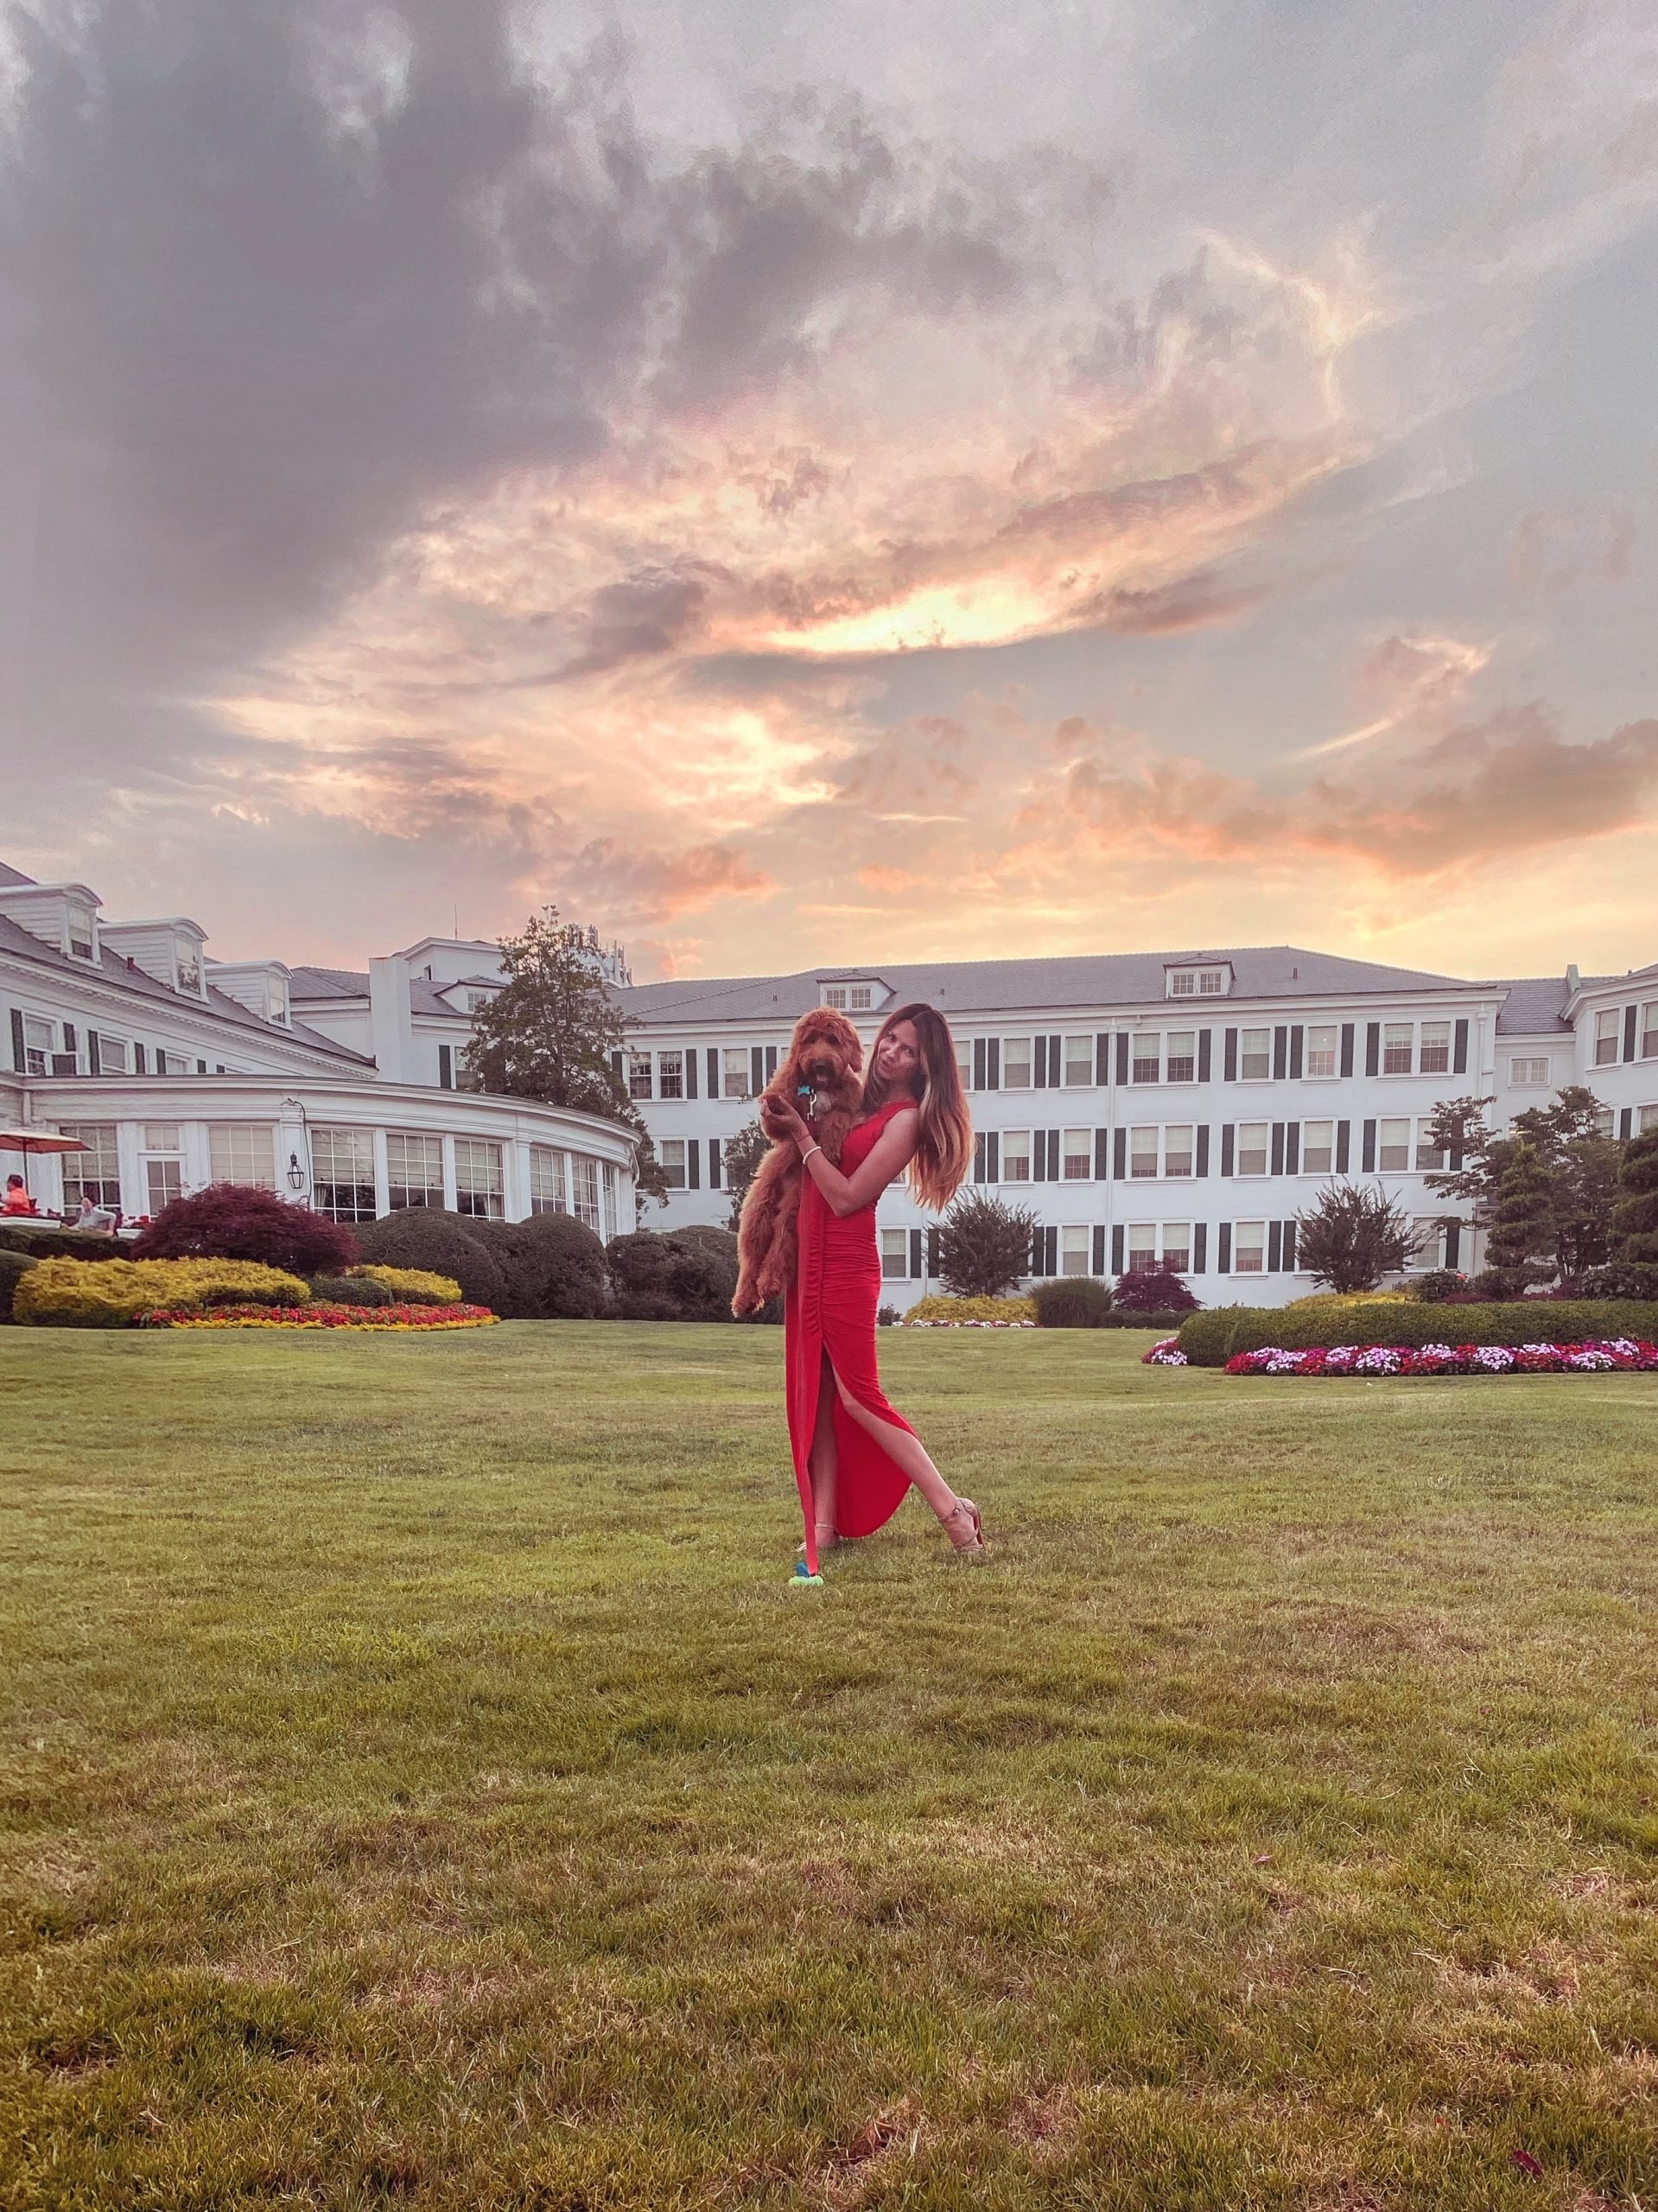 Chocolate and Lace shares her family trip to Seaview Hotel in Galloway New Jersey.